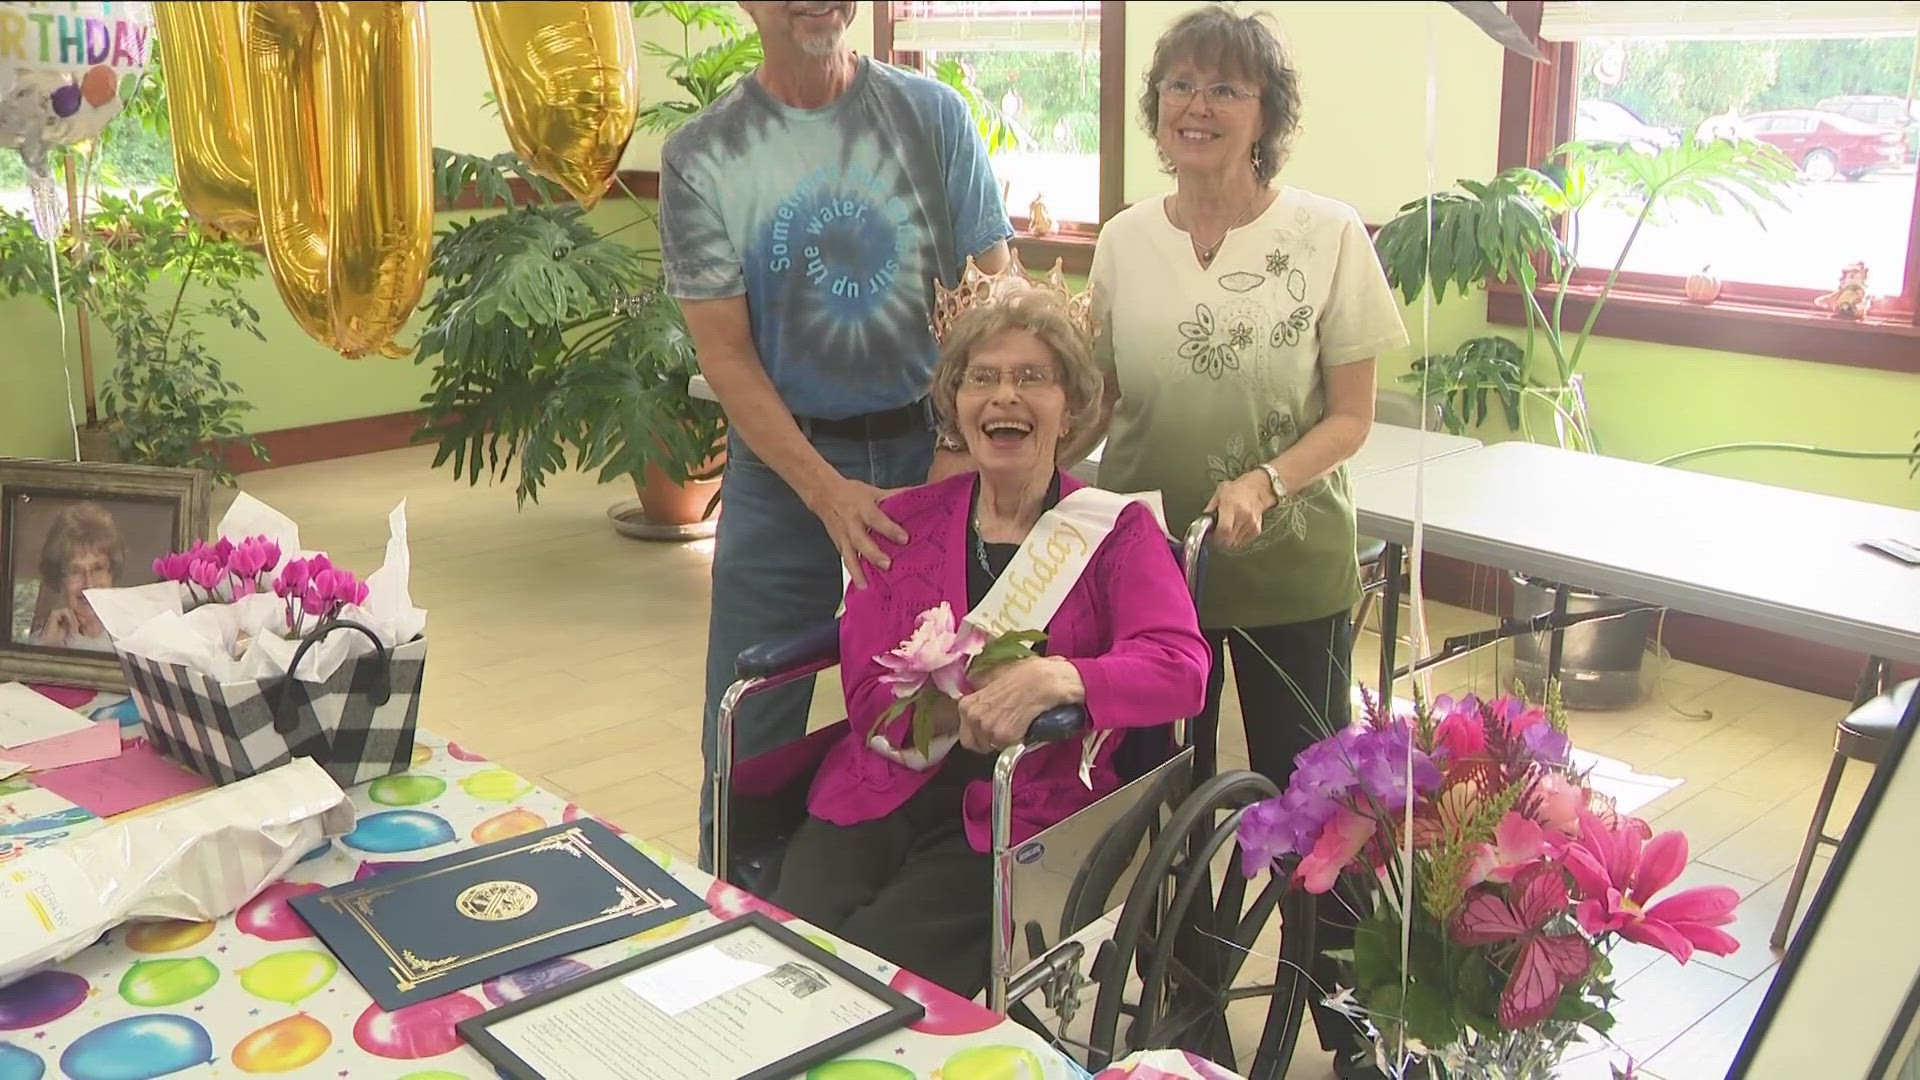 Marion Ahles celebrated her 107th birthday with friends and family on Wednesday.